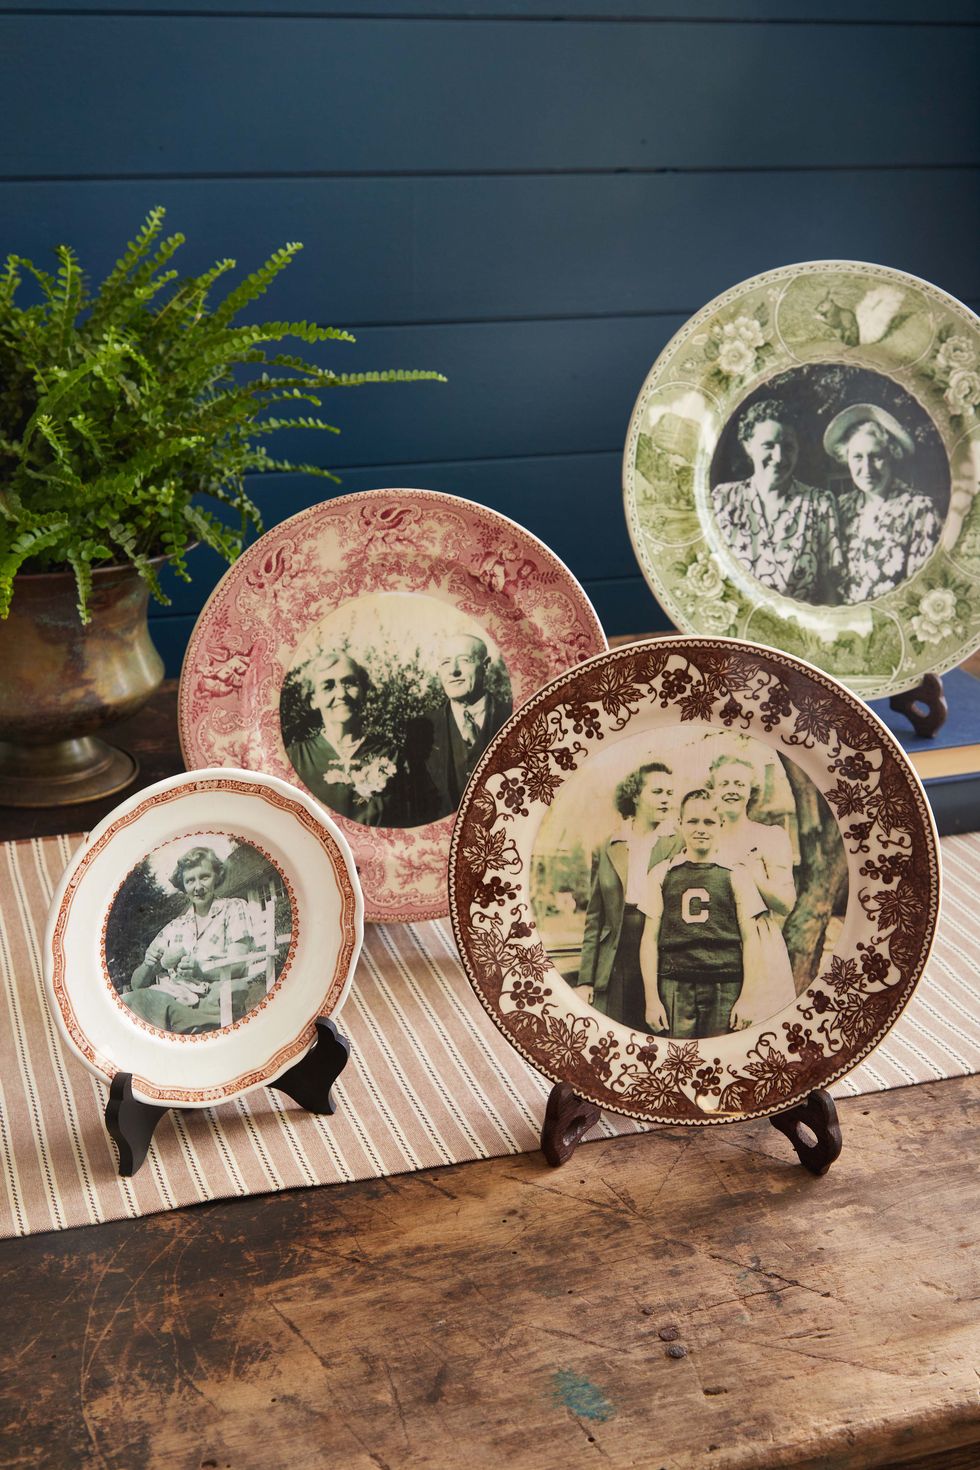 black and white photos decoupaged into the middle of decorative plates